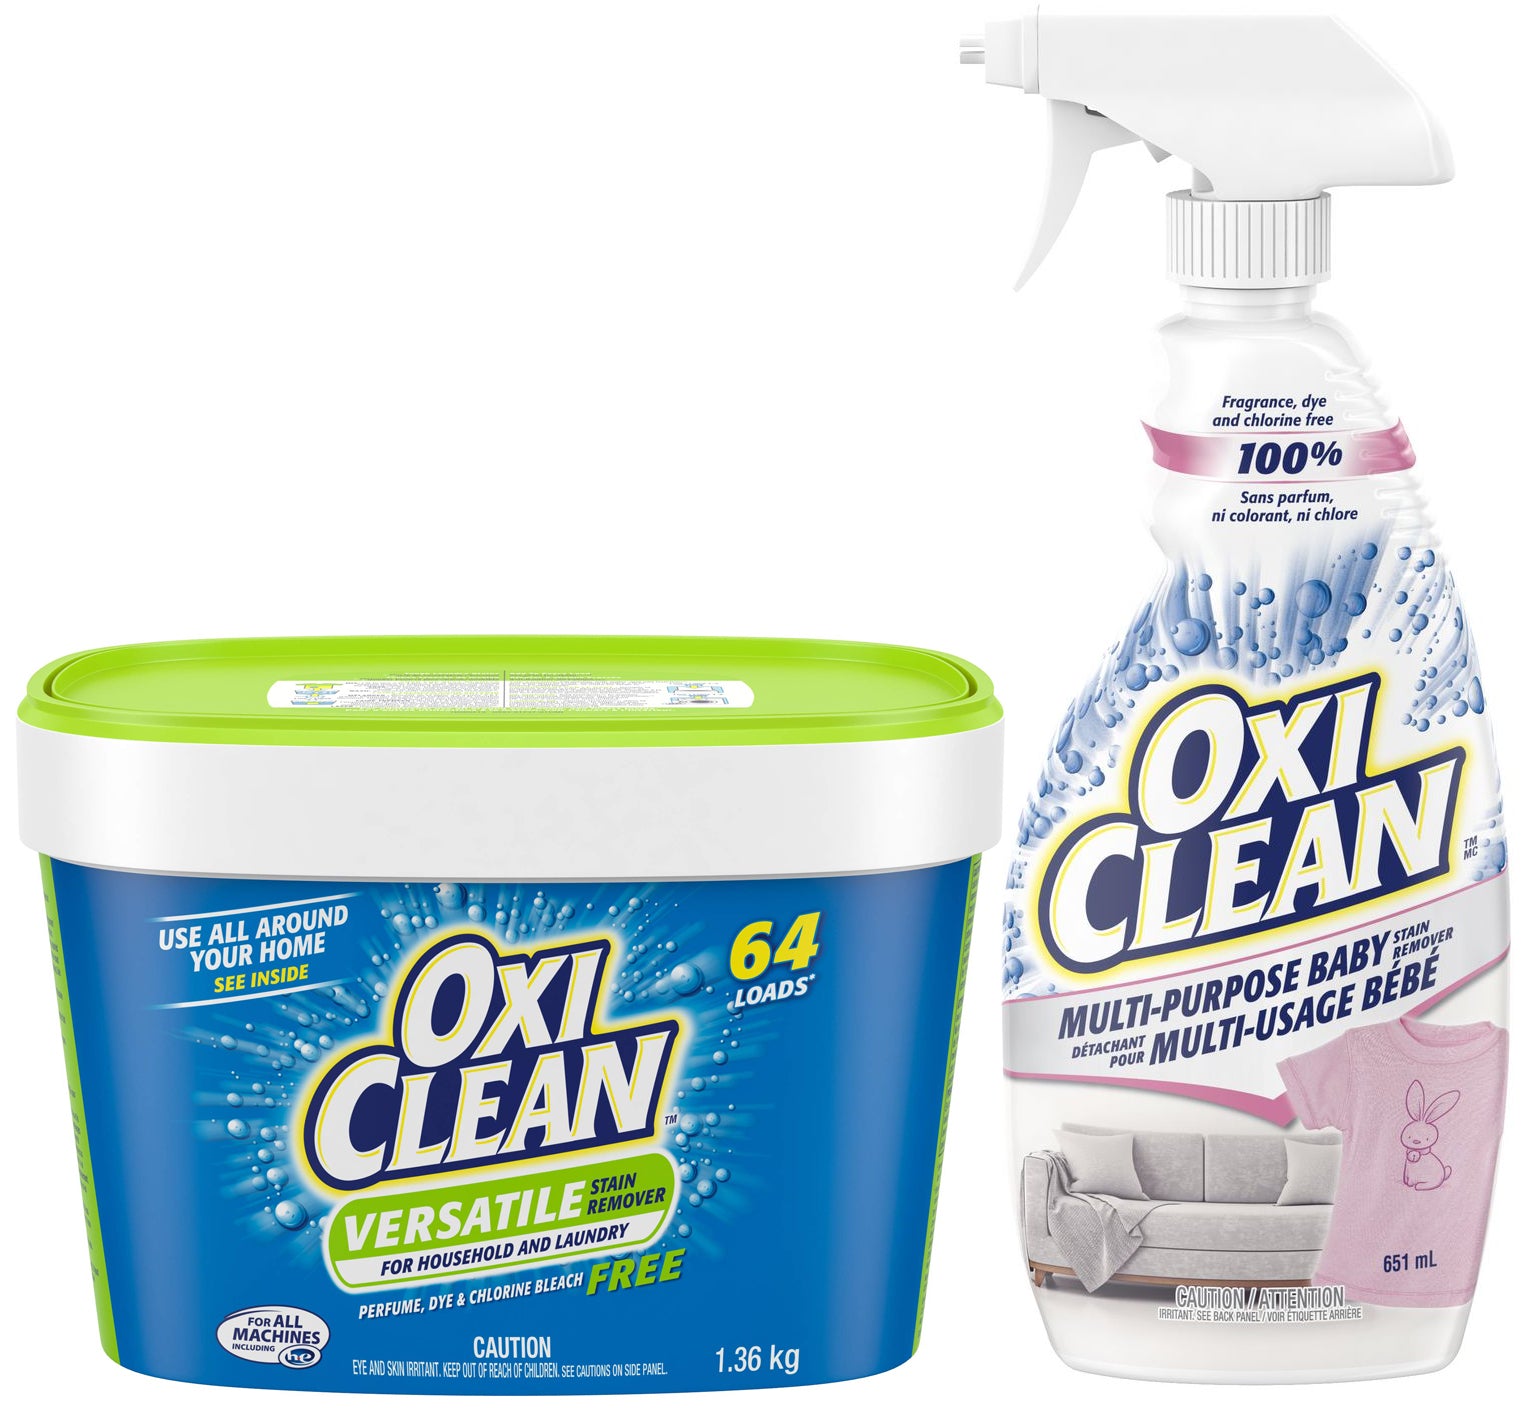 http://cdn.shopify.com/s/files/1/2400/0975/files/OxiClean-Baby-or-Free-oxygen-based-cleaner_2048x.jpg?v=1584298953